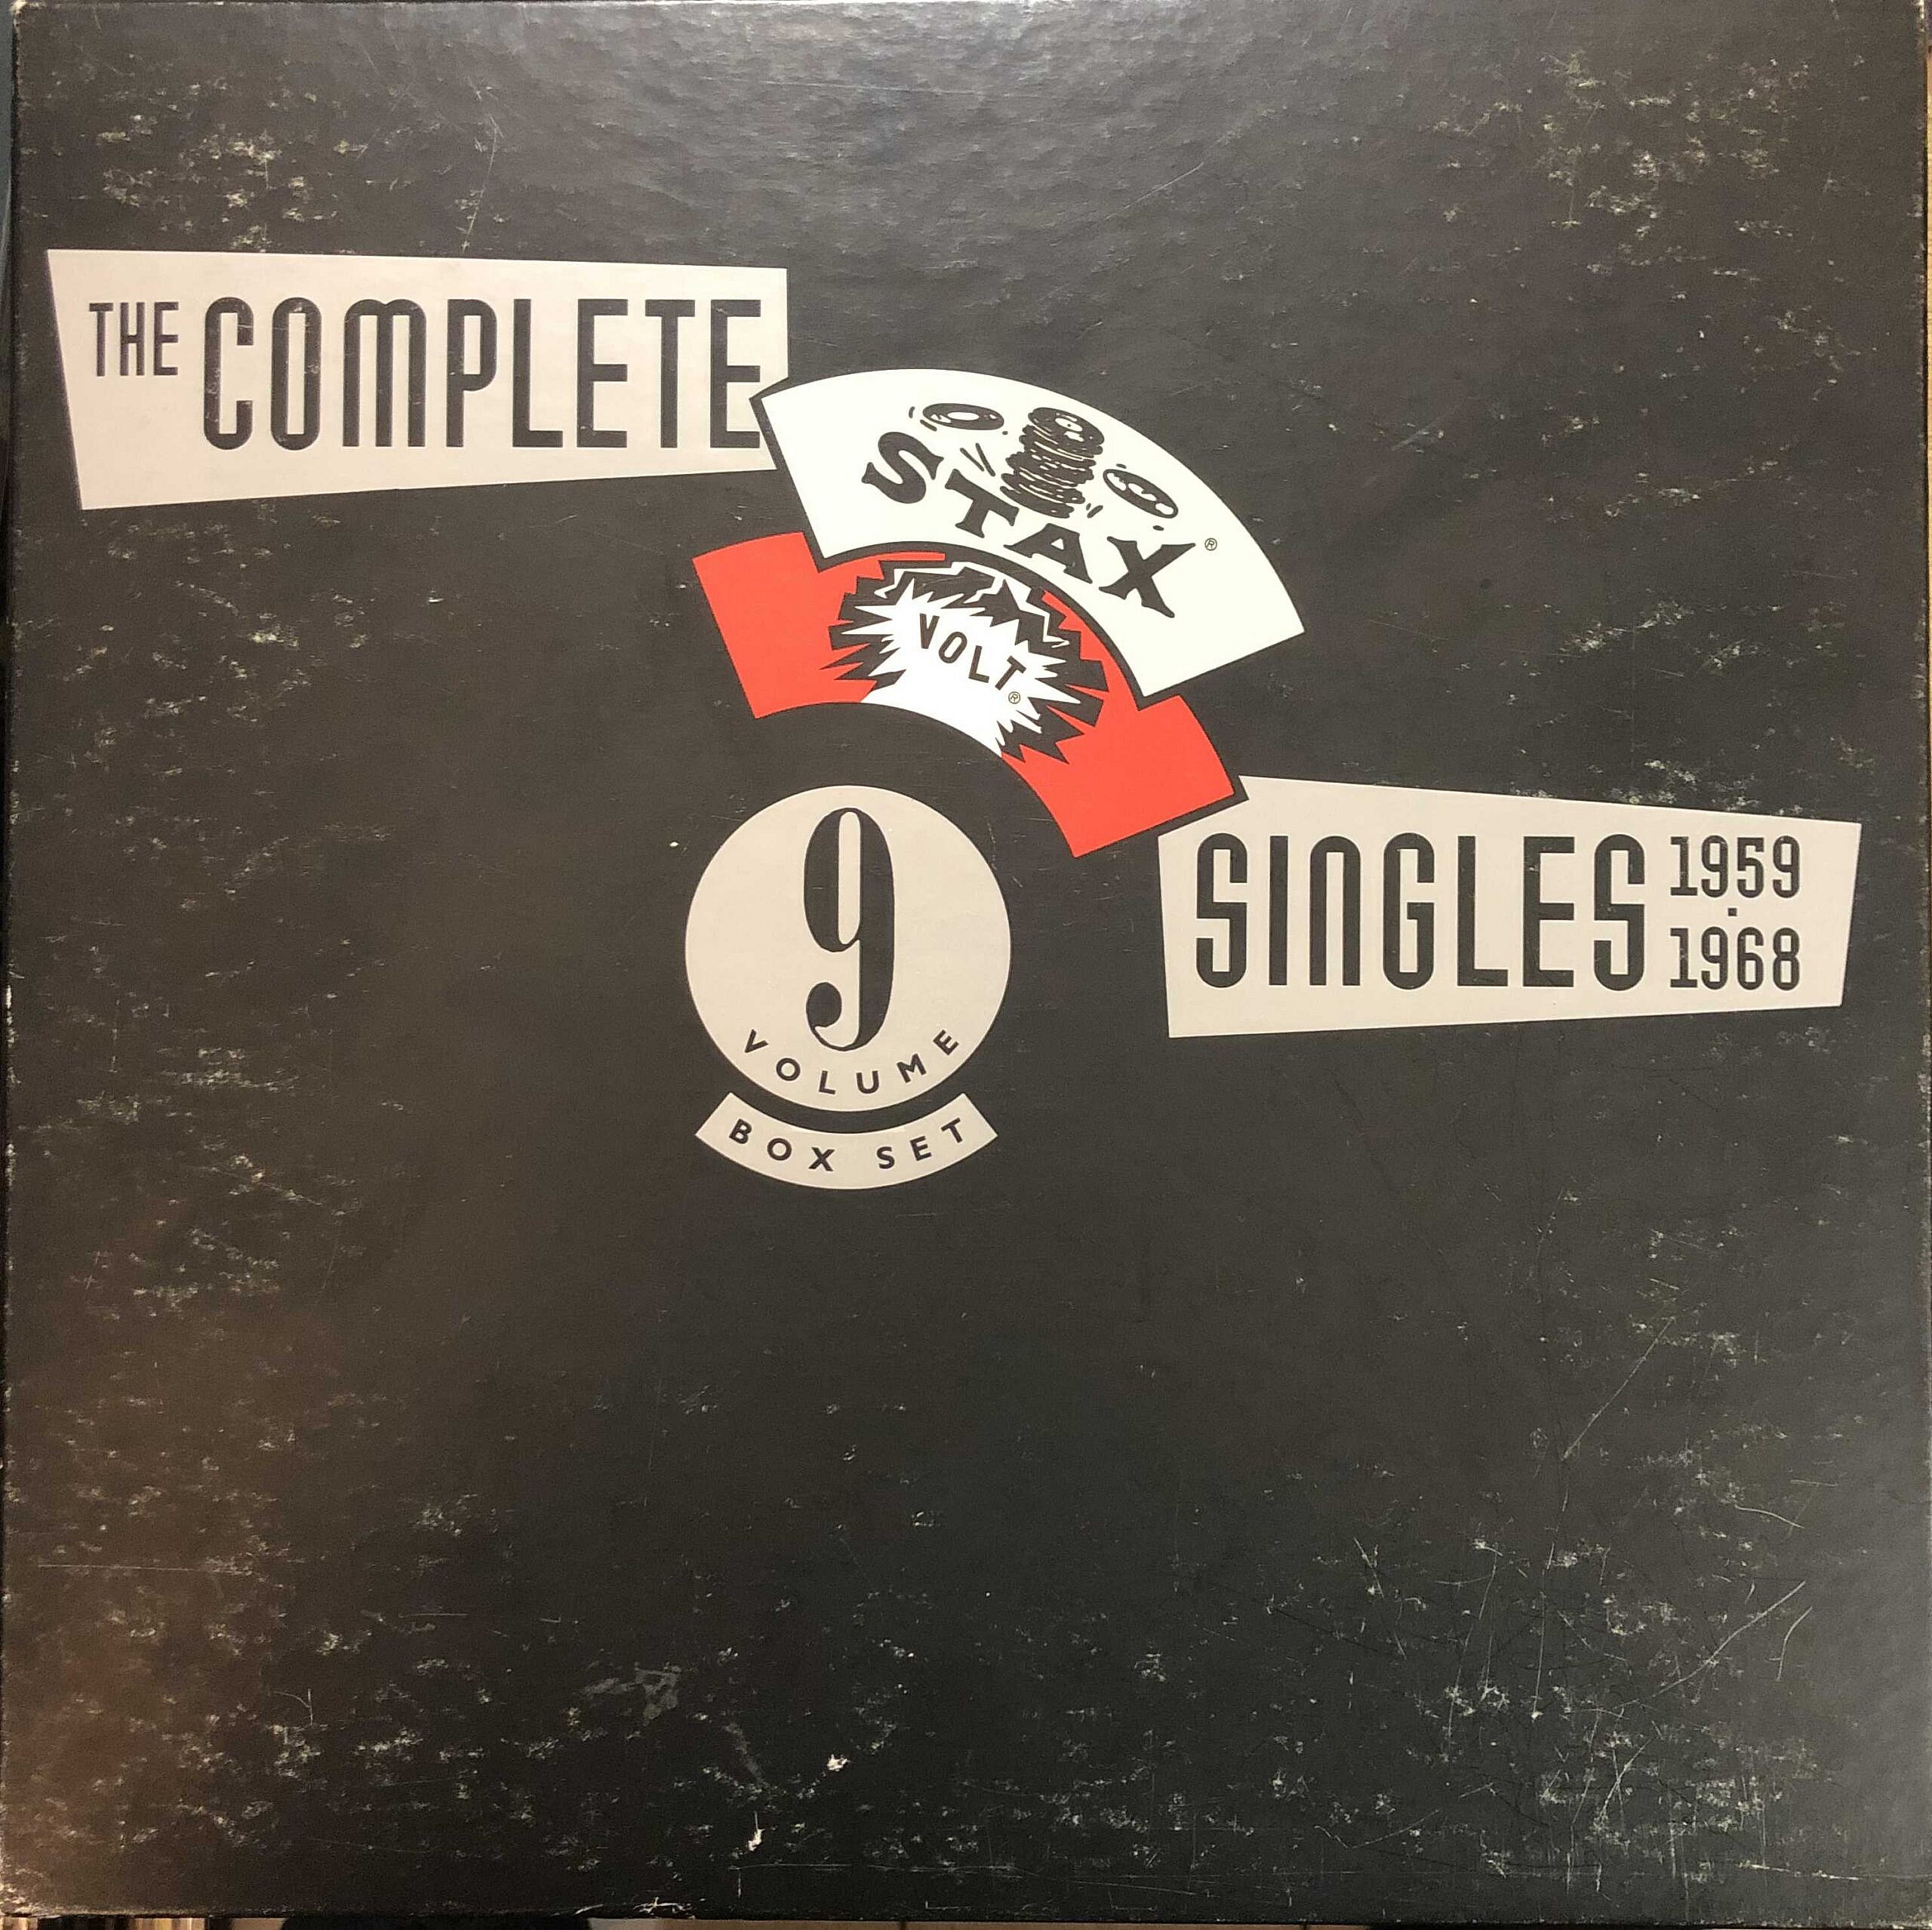 The Complete Stax/Volt singles 1959-1968 Volume 9 CD box set in 12" box